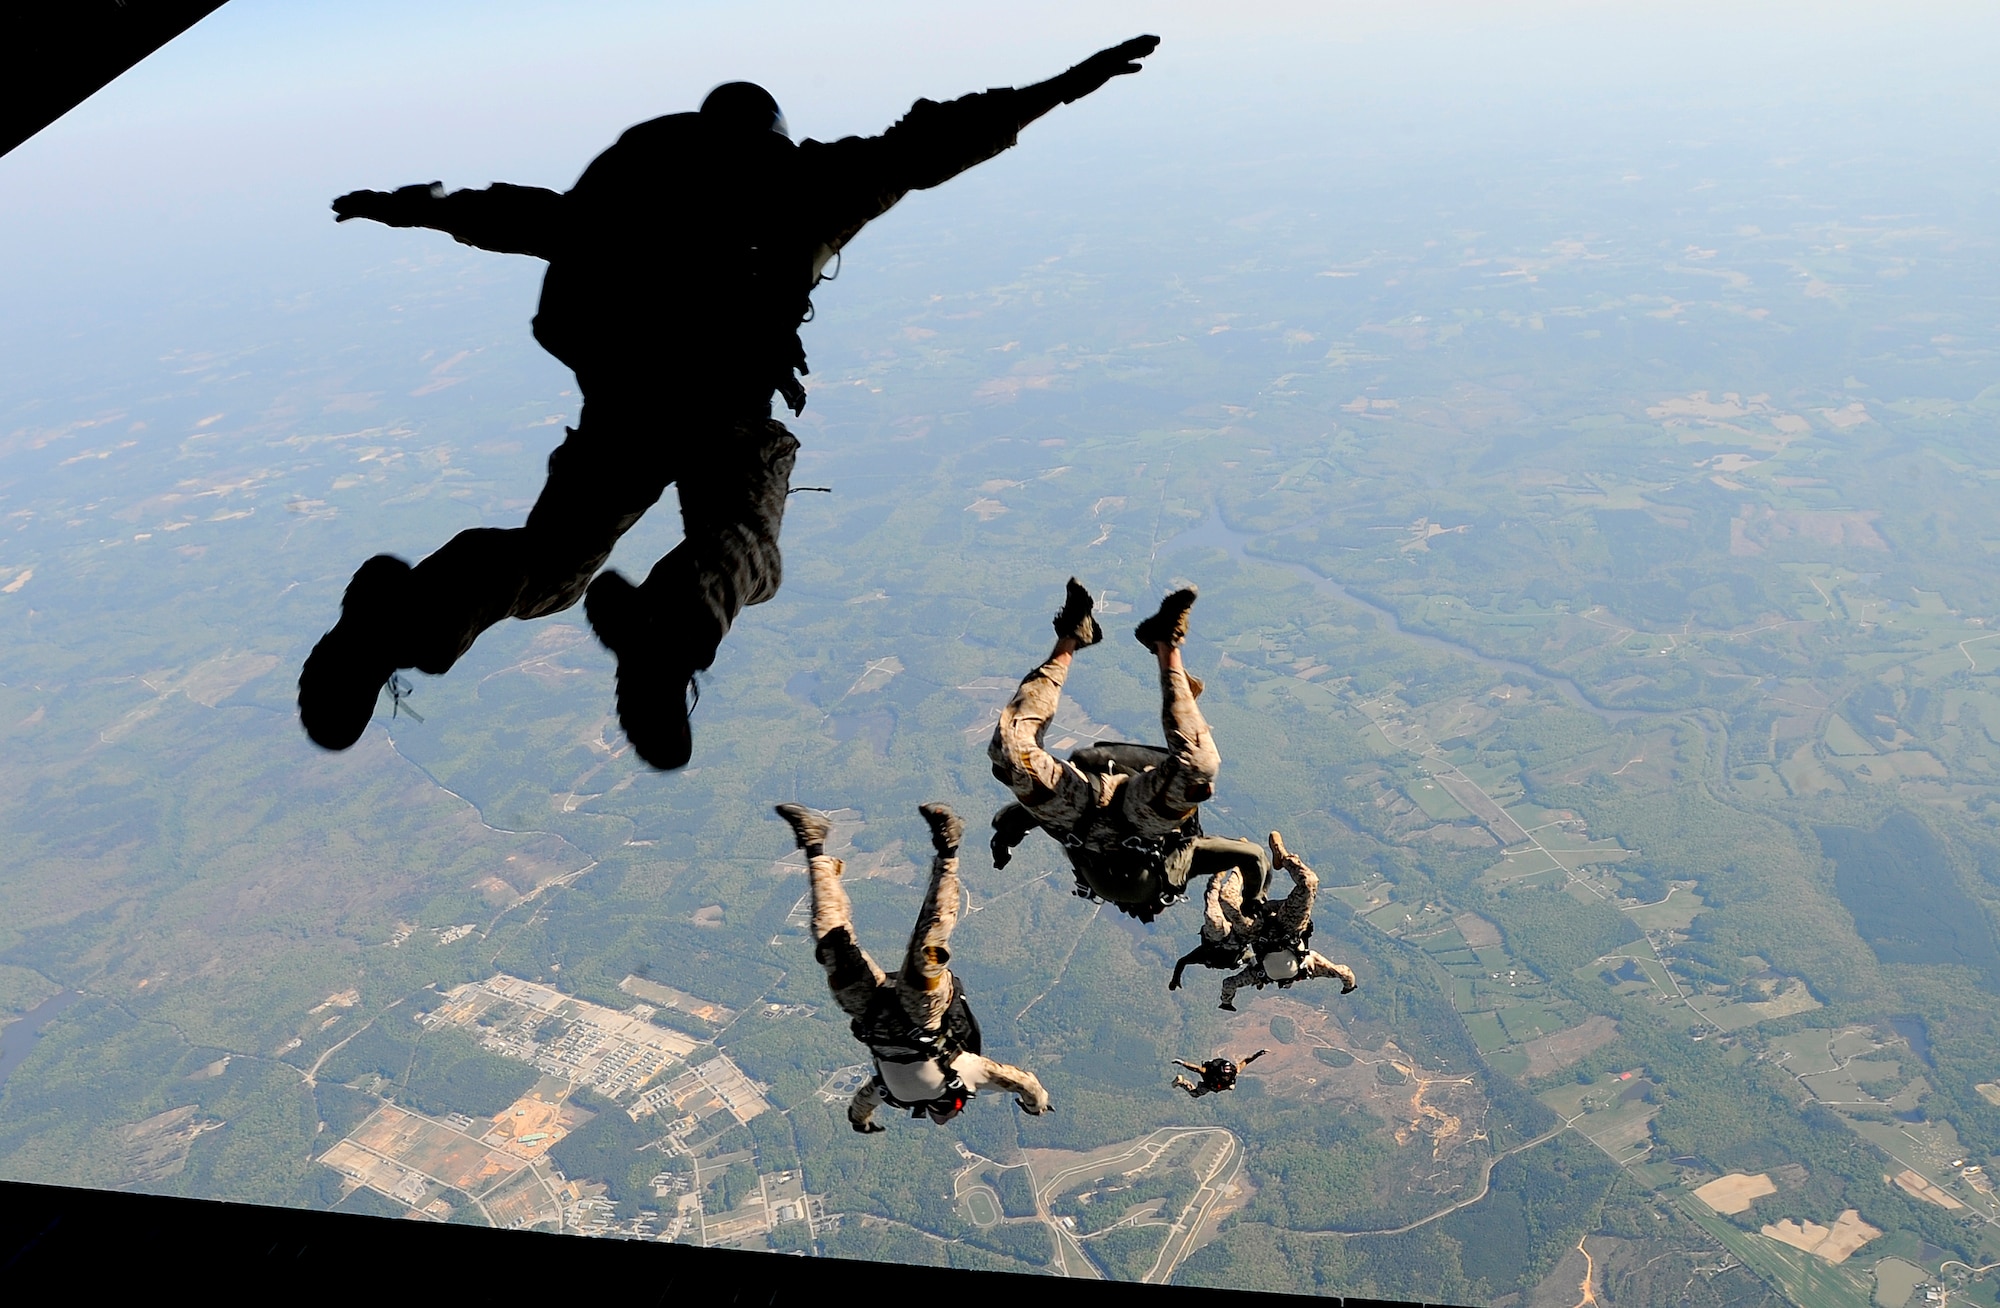 Navy SEALs jump from the ramp of a C-17 Globemaster III over Fort Picket Maneuver Training Center, Va., April 15.  The jump was part of joint training exercise with the 517th Airlift Squadron from Elmendorf Air Force Base, Alaska. The training consisted of high altitude, high opening and high altitude, low opening jumps between 5,000 and 12,500 feet. (Air Force photo by Staff Sgt. Brian Ferguson)